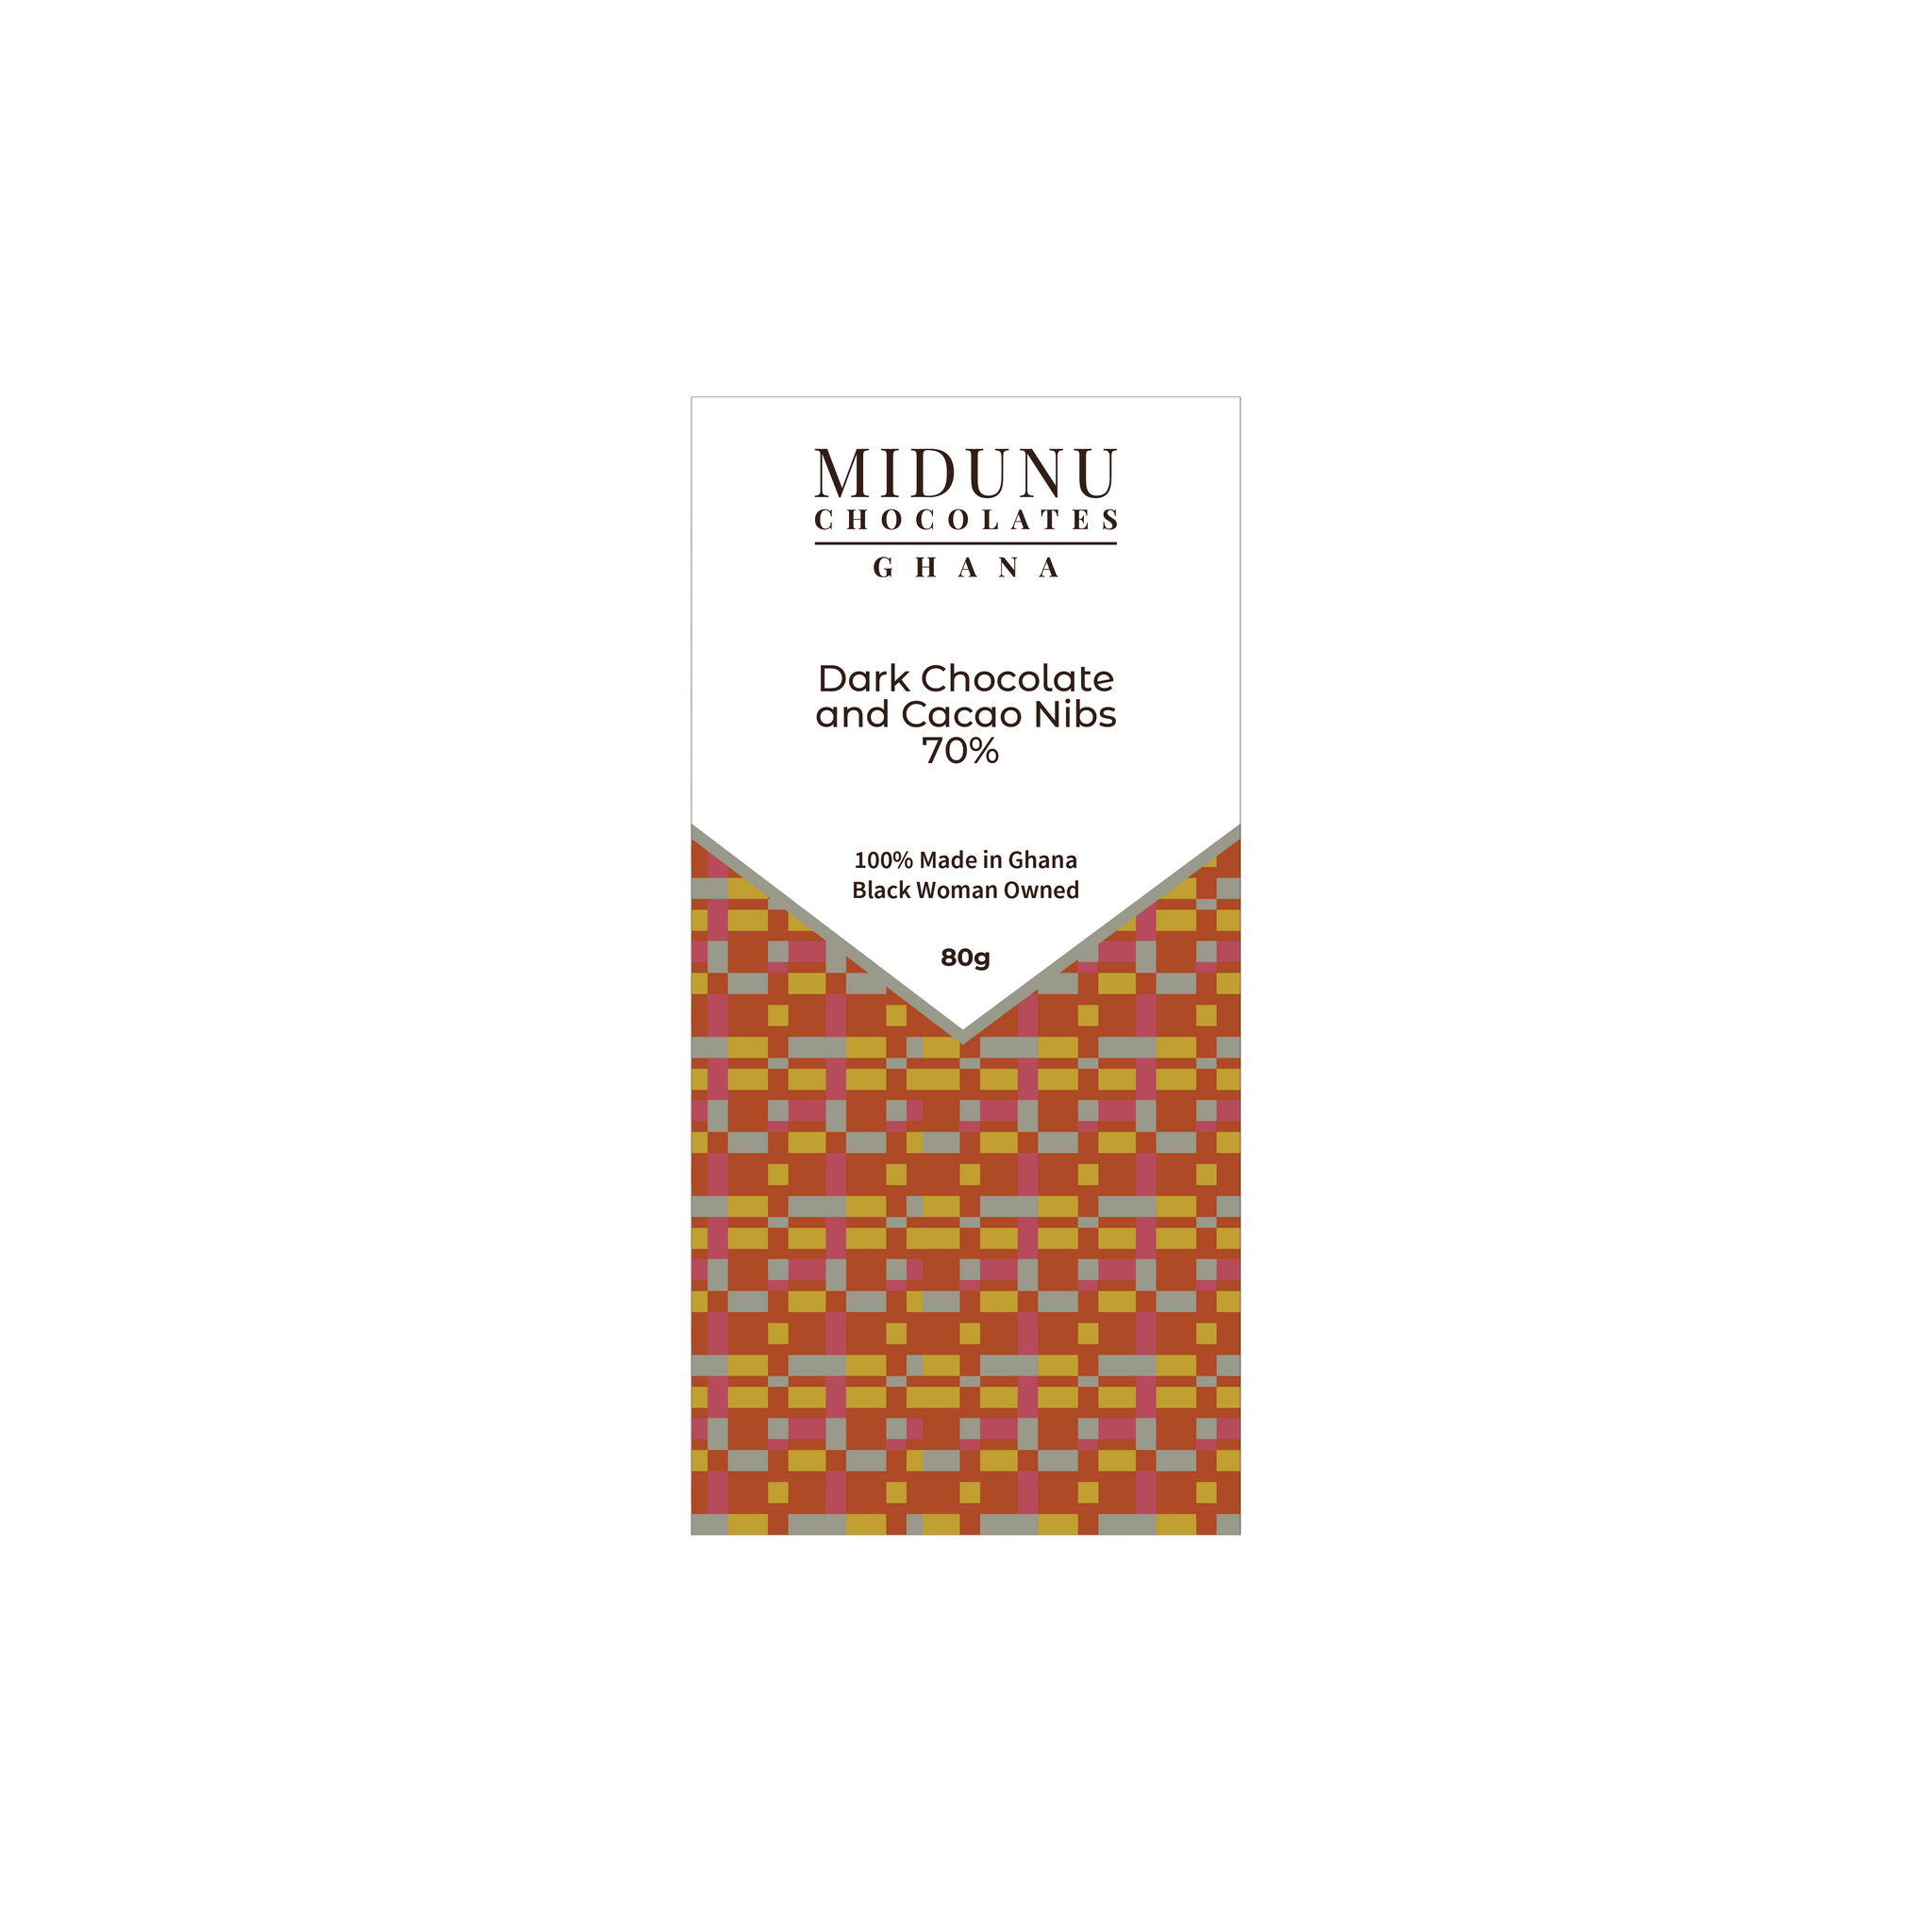 Midunu Chocolates are created by an award winning chef in Accra, Ghana. The traditional method of fermenting cocoa beans in plantain and banana leaves instills a unique flavor.  In this bar, expect intense cacao notes.